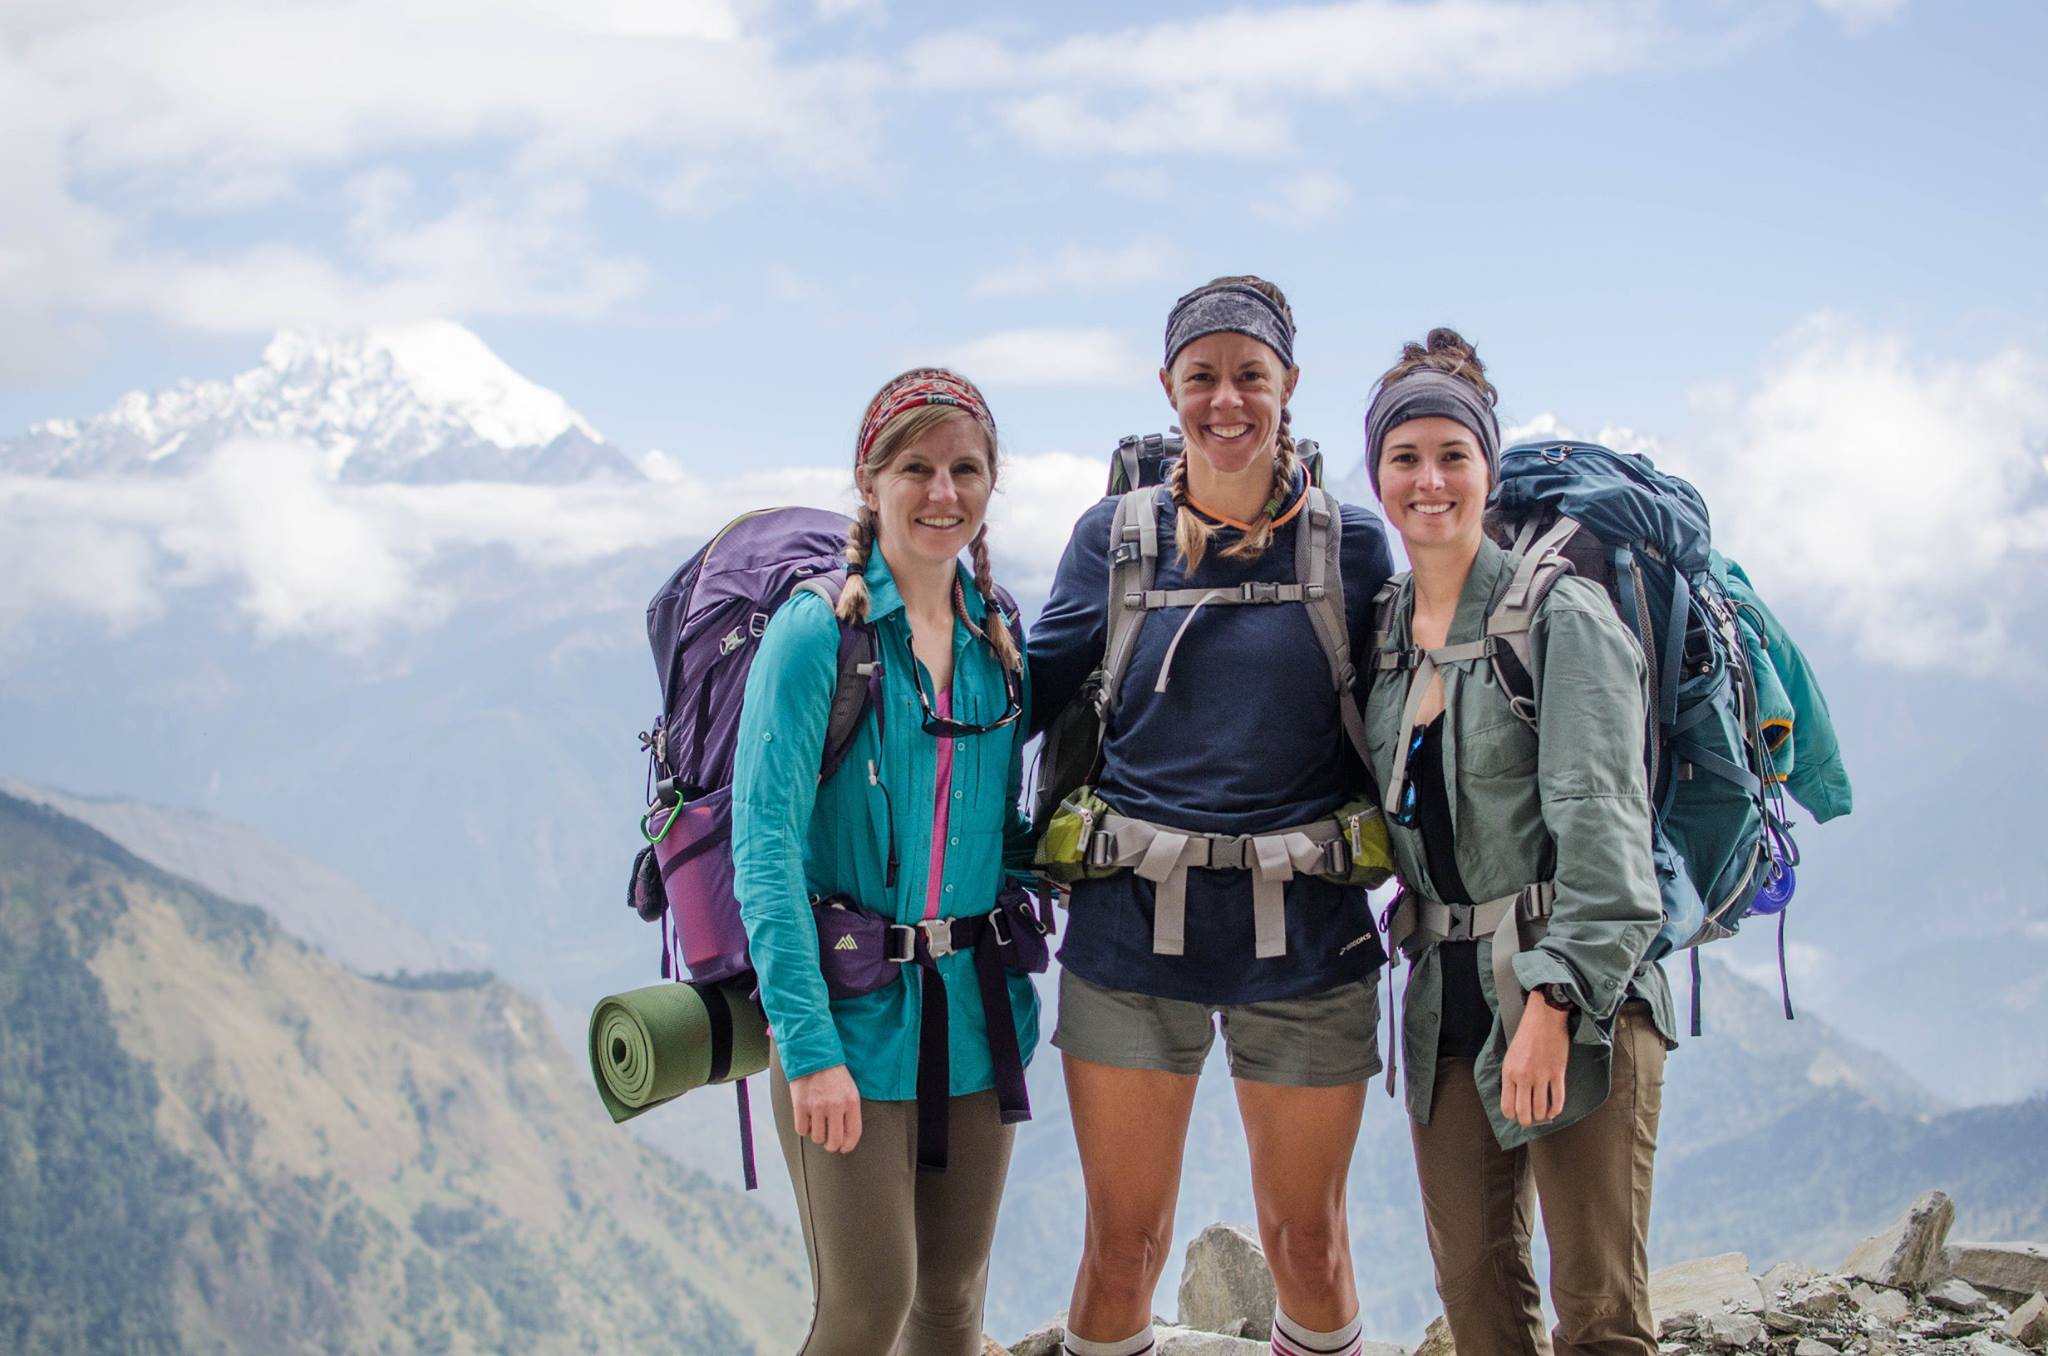 IS NEPAL SAFE FOR SOLO FEMALE TRAVELERS?